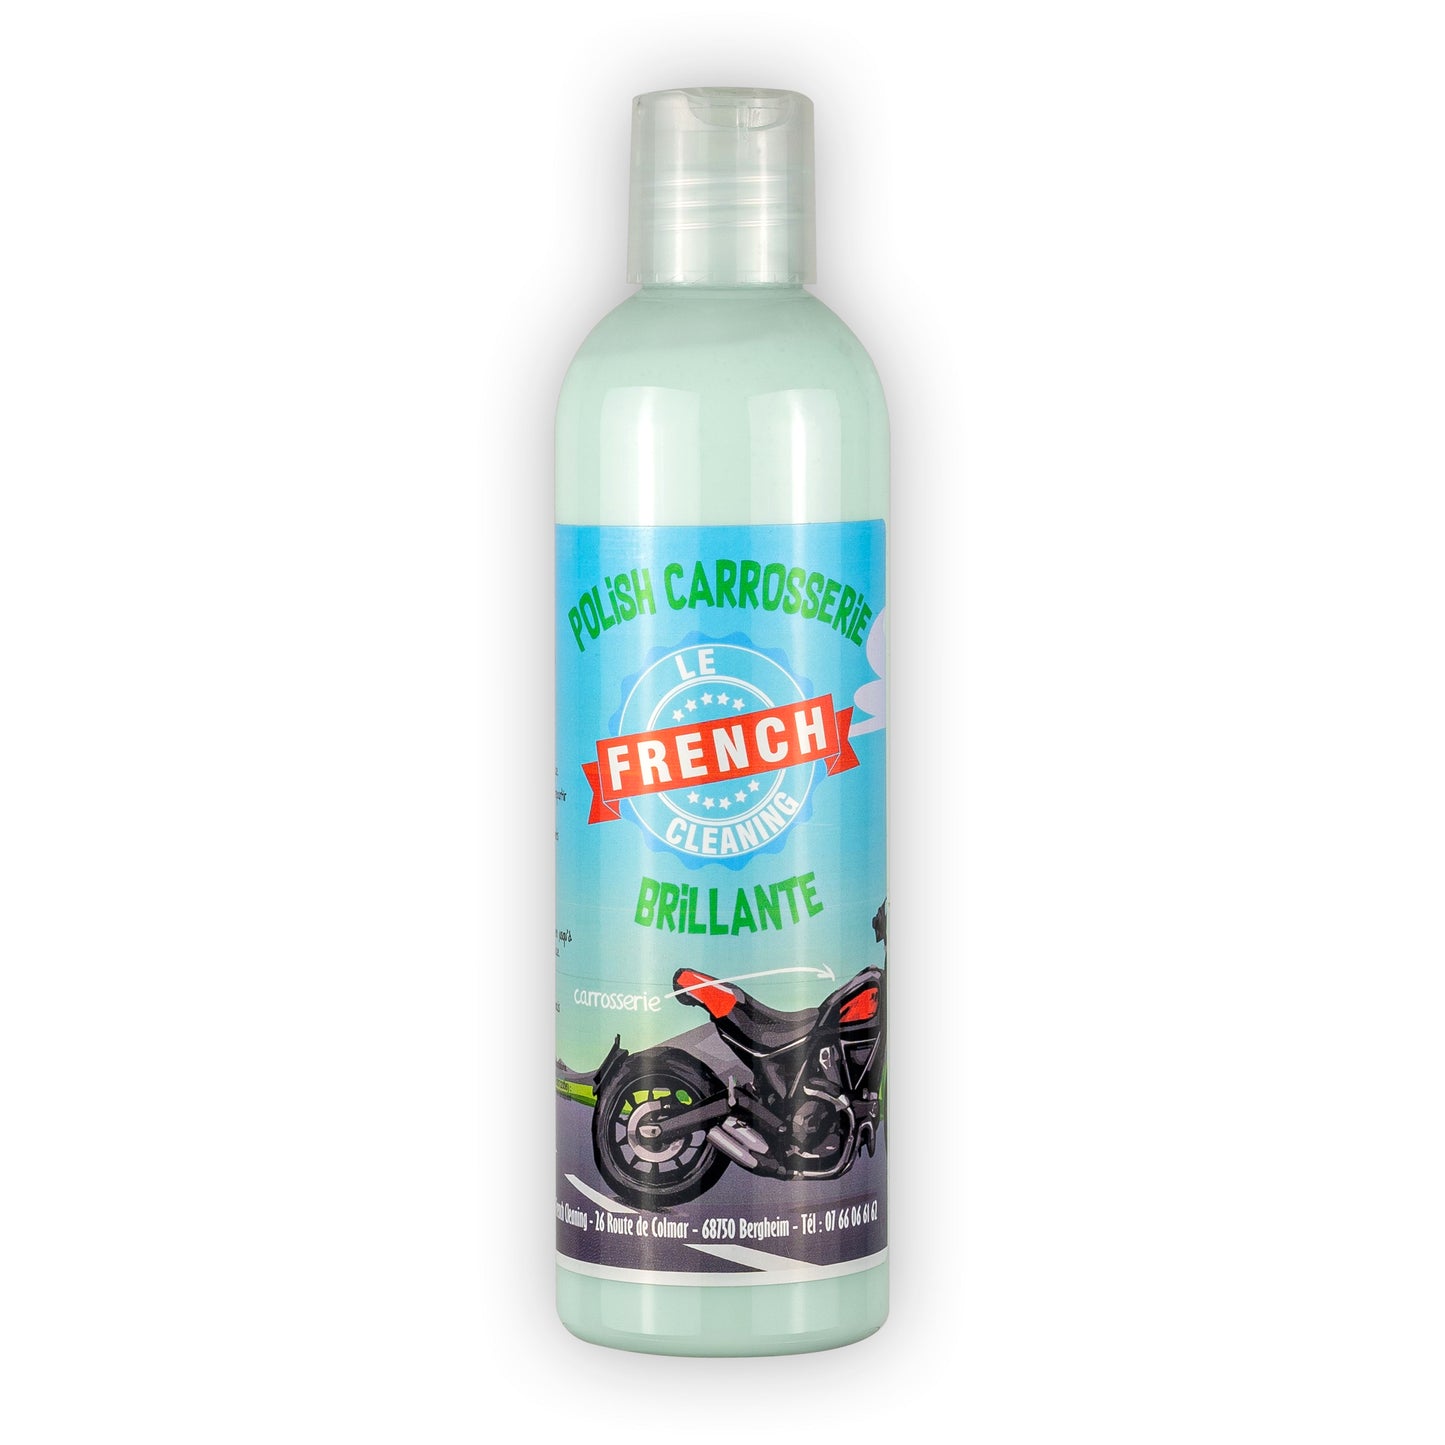 Polish lustrant pour carrosserie Brillante Le French Cleaning 